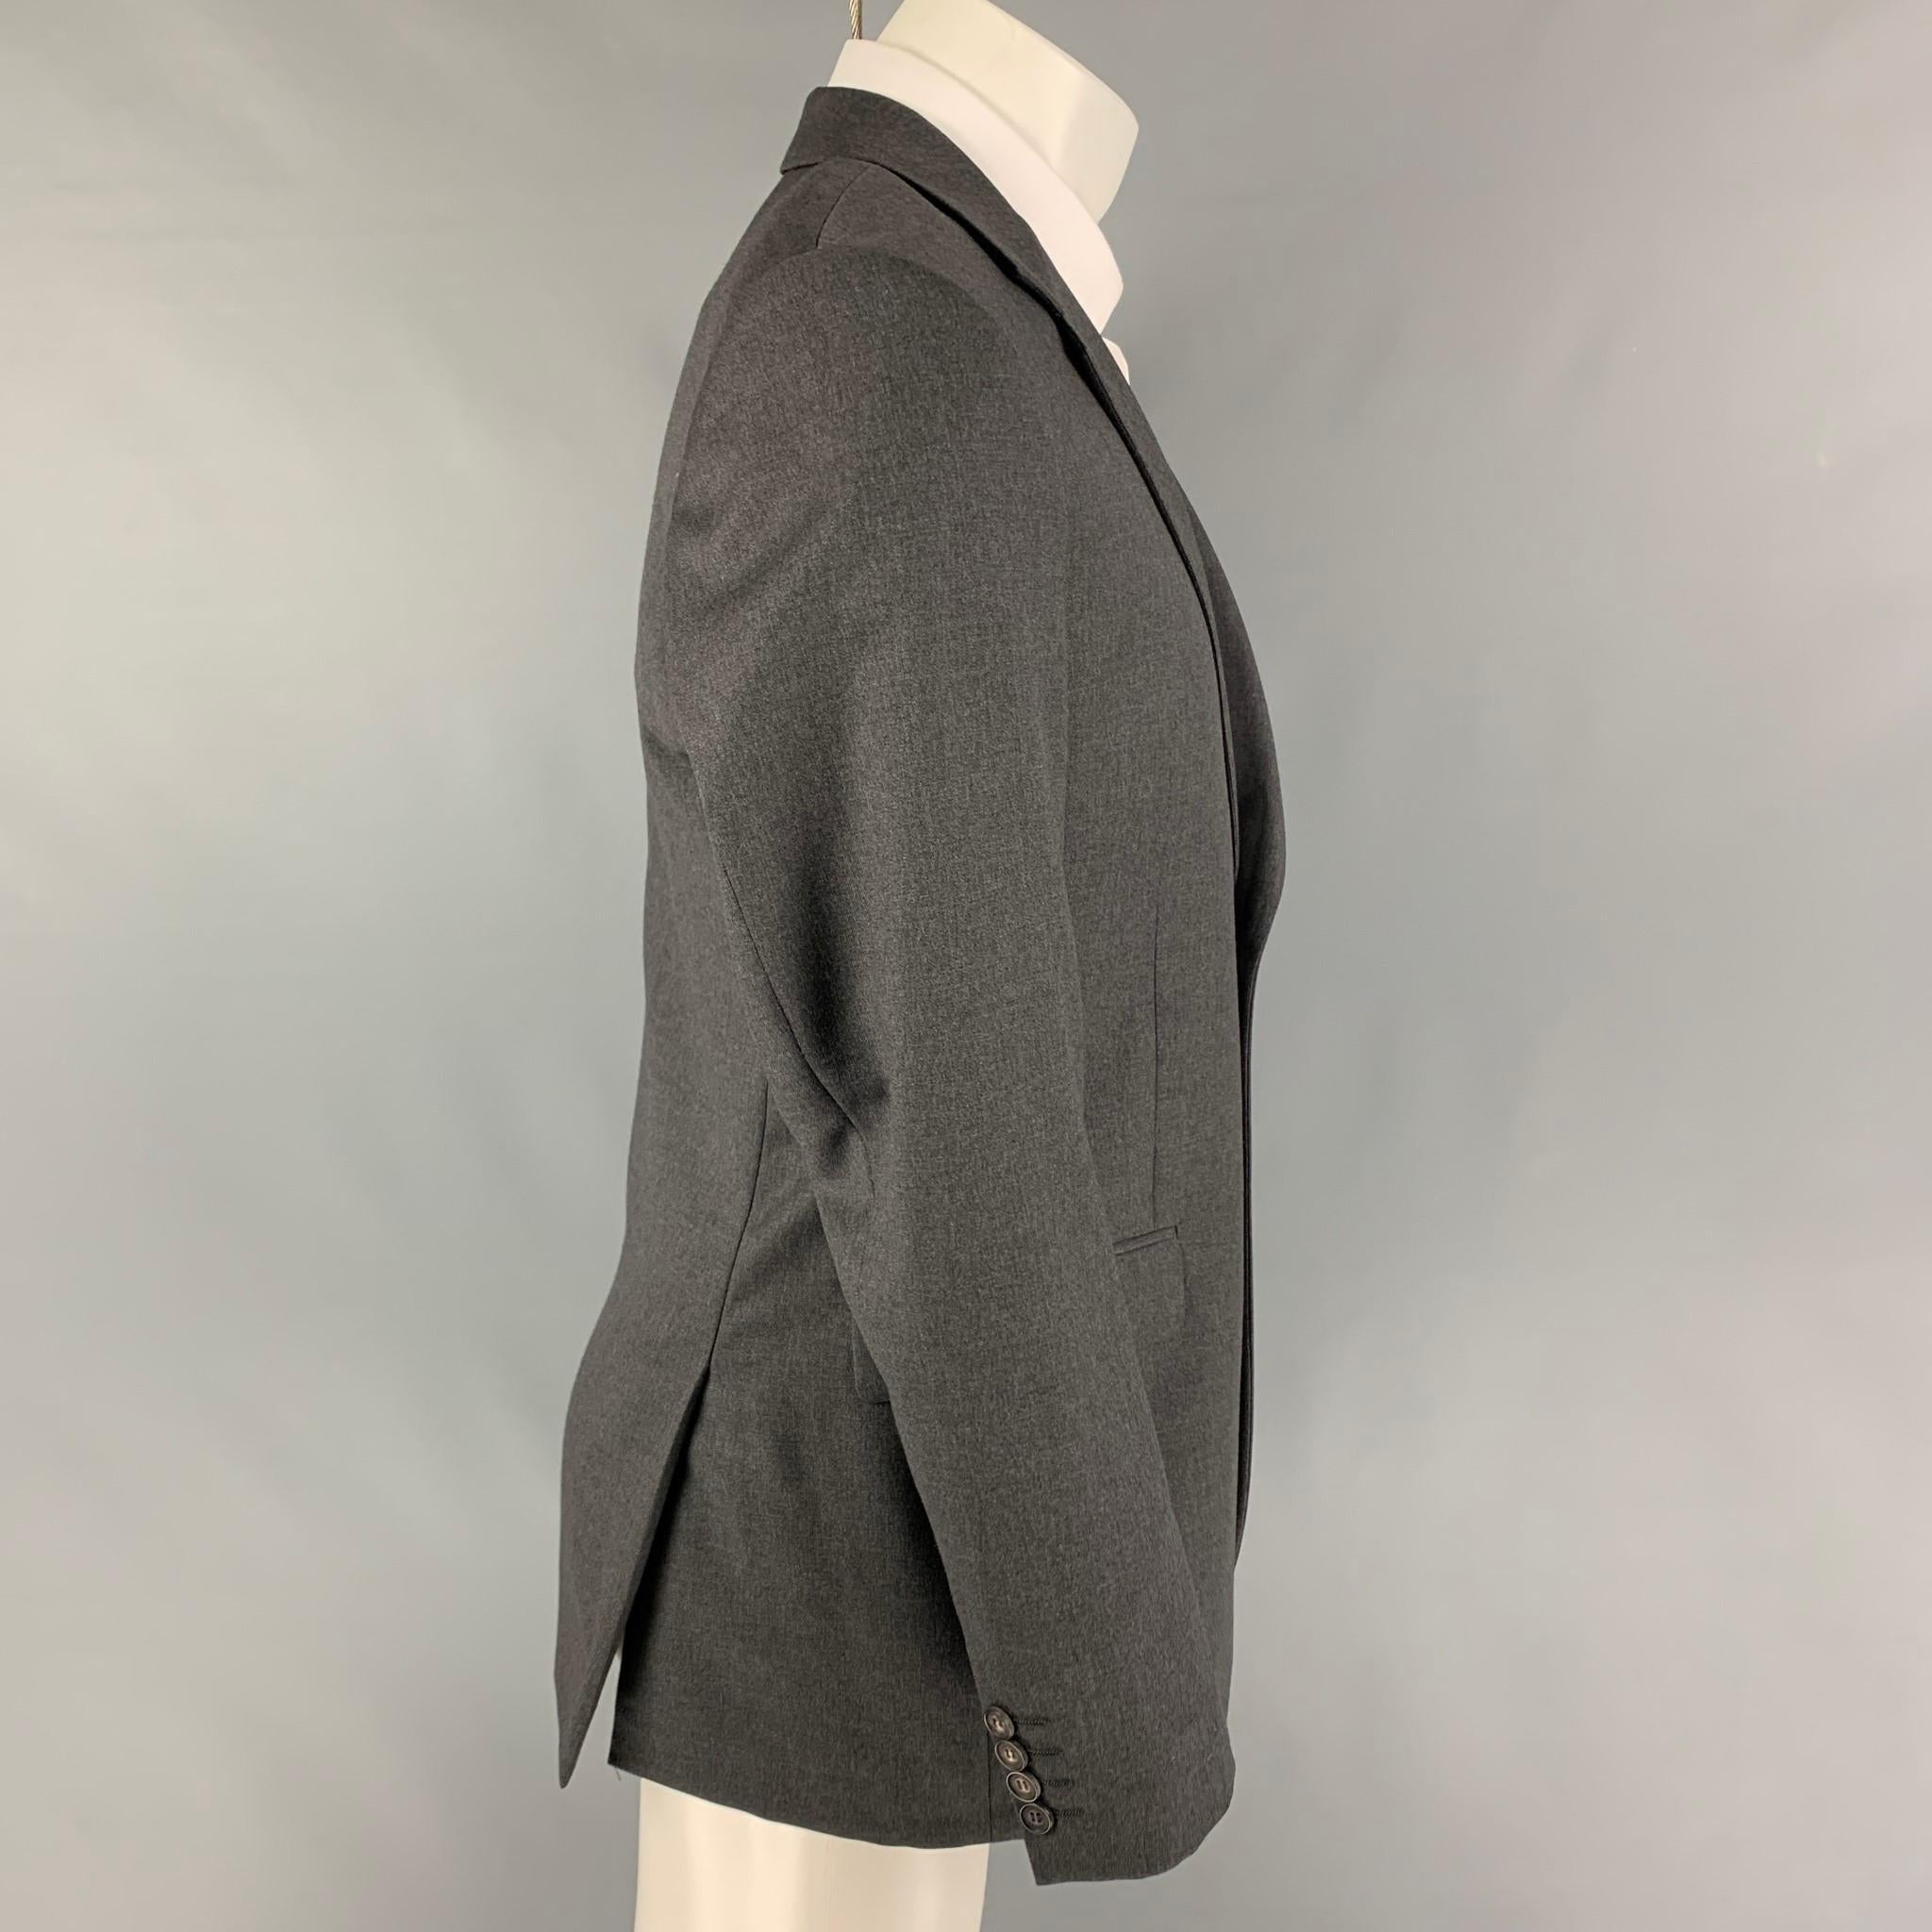 CALVIN KLEIN COLLECTION sport coat comes in a dark gray wool with a full liner featuring a notch lapel, flap pockets, double back vent, and a double button closure. 

Very Good Pre-Owned Condition.
Marked: 50/40

Measurements:

Shoulder: 18